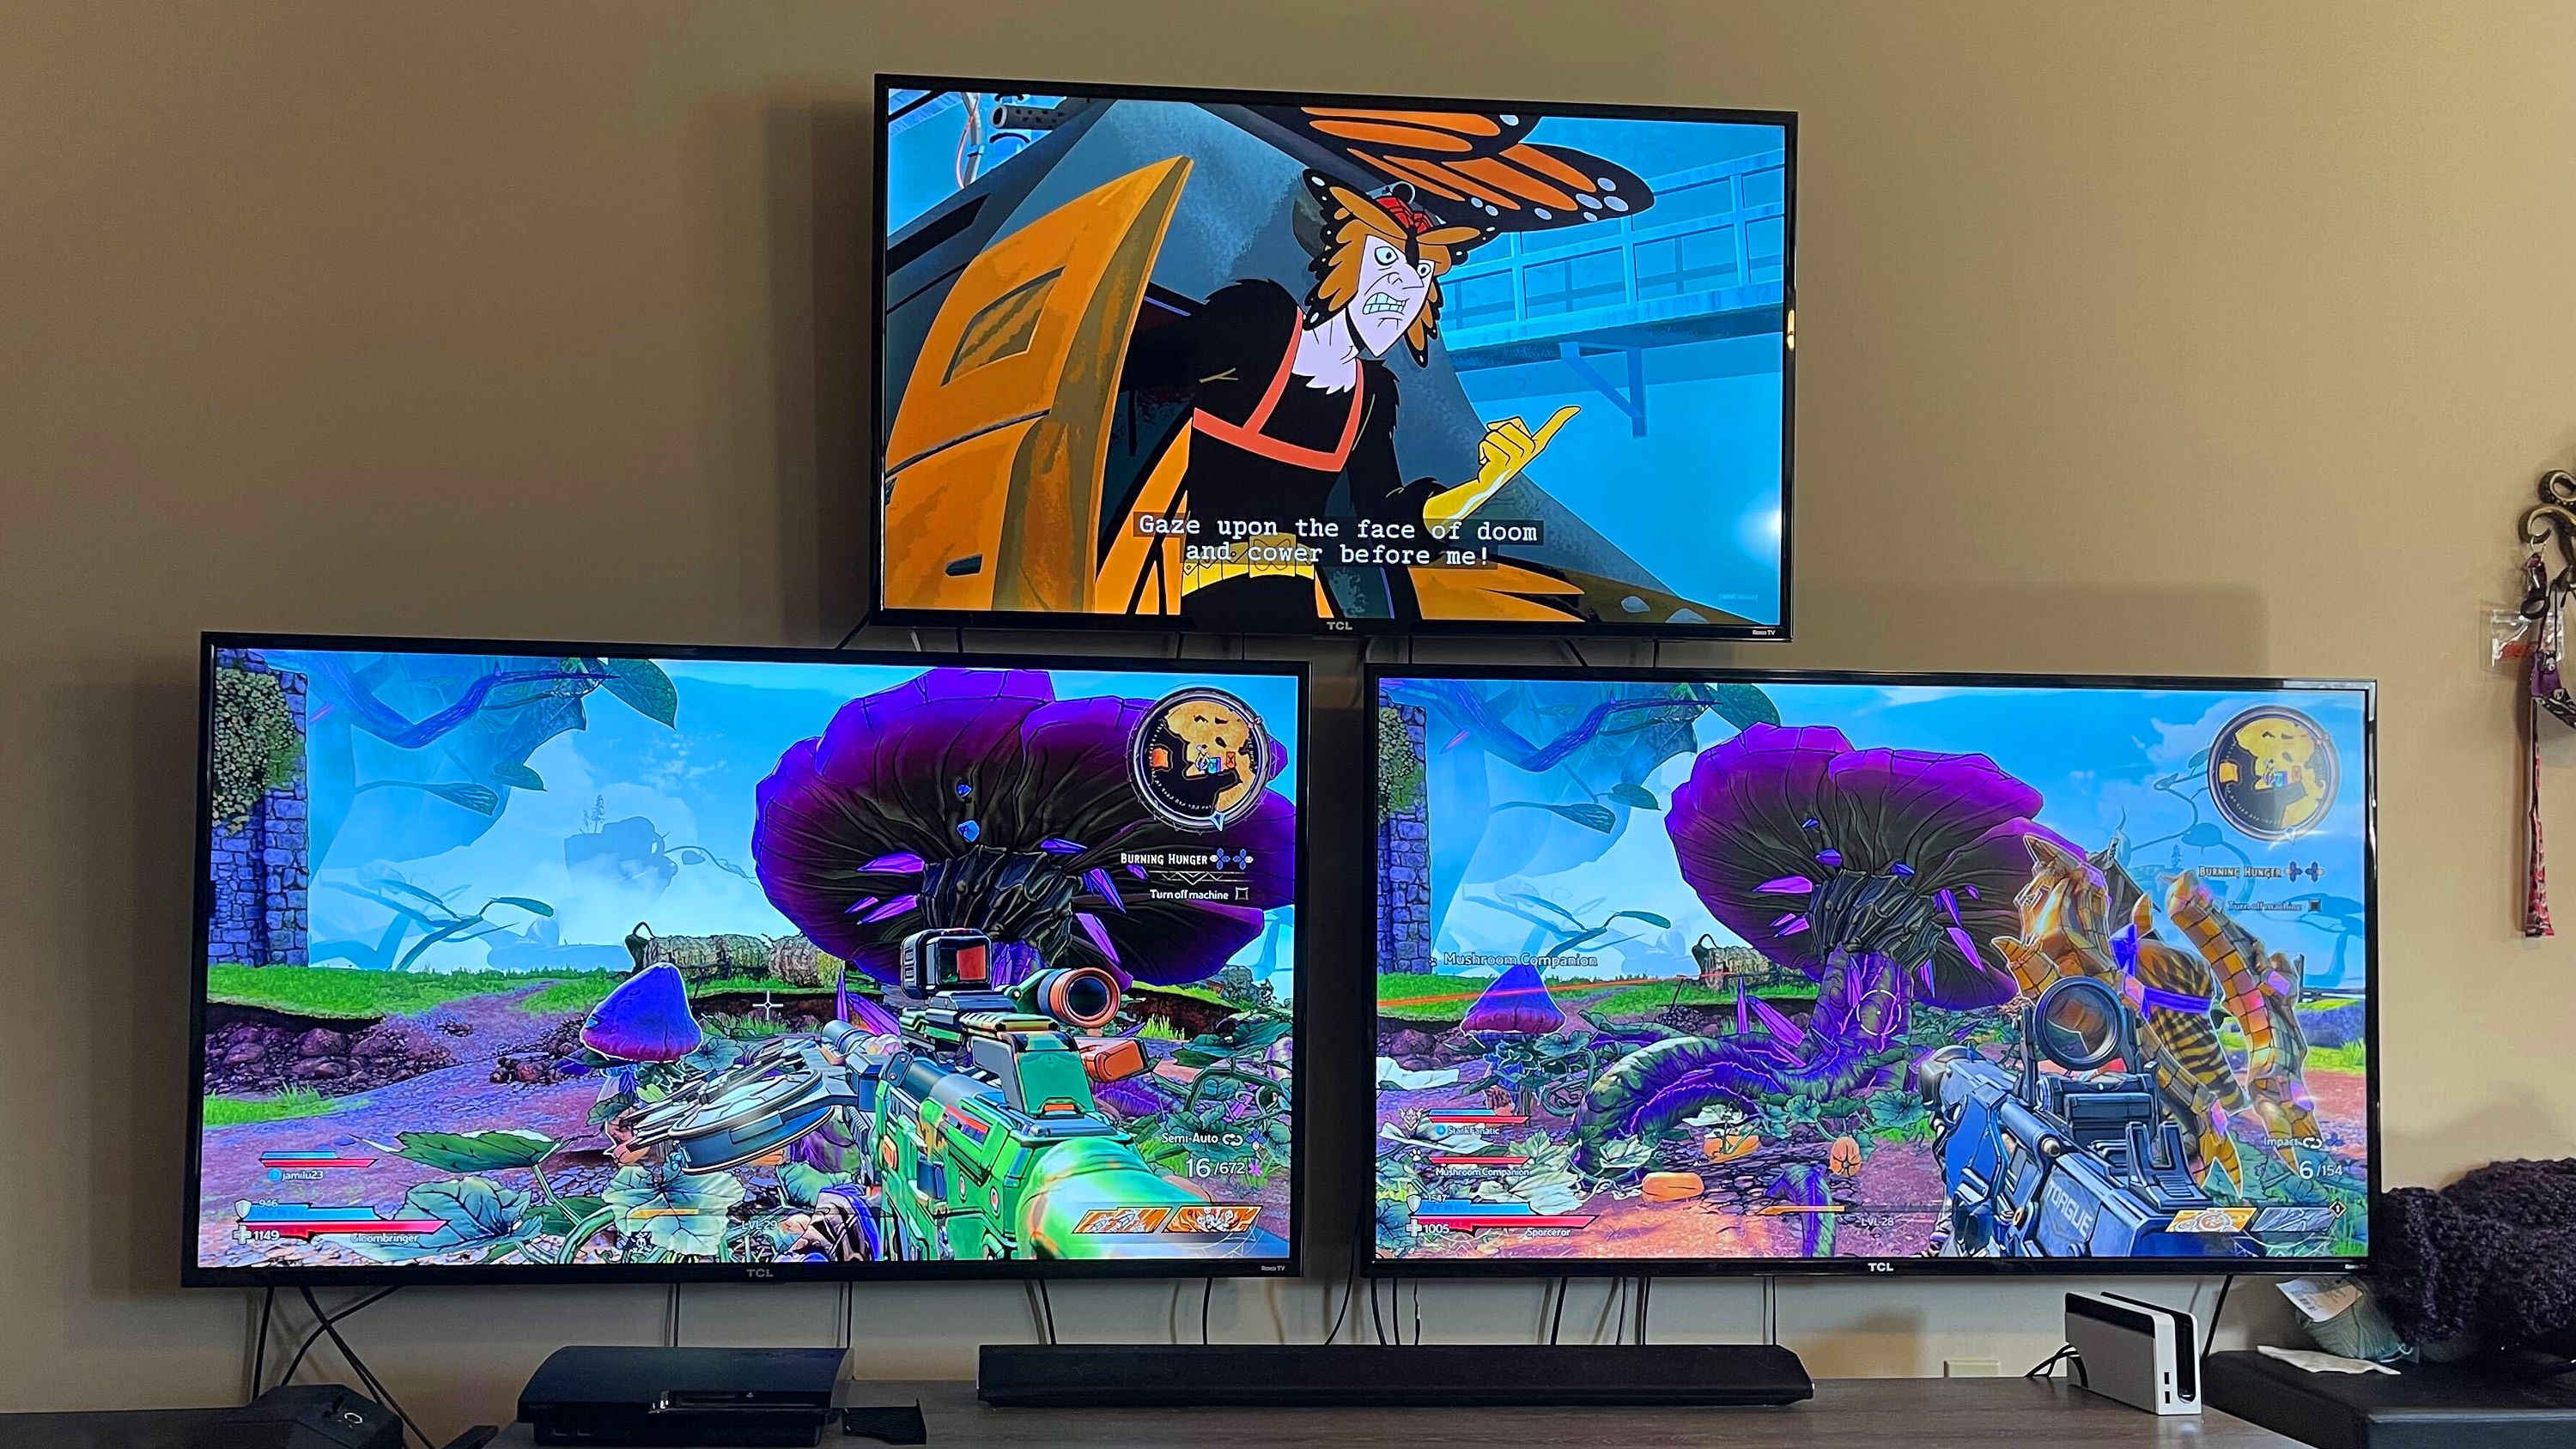 Two TVs show players playing Tiny Tina’s Wonderlands while Venture Bros. plays on the top TV